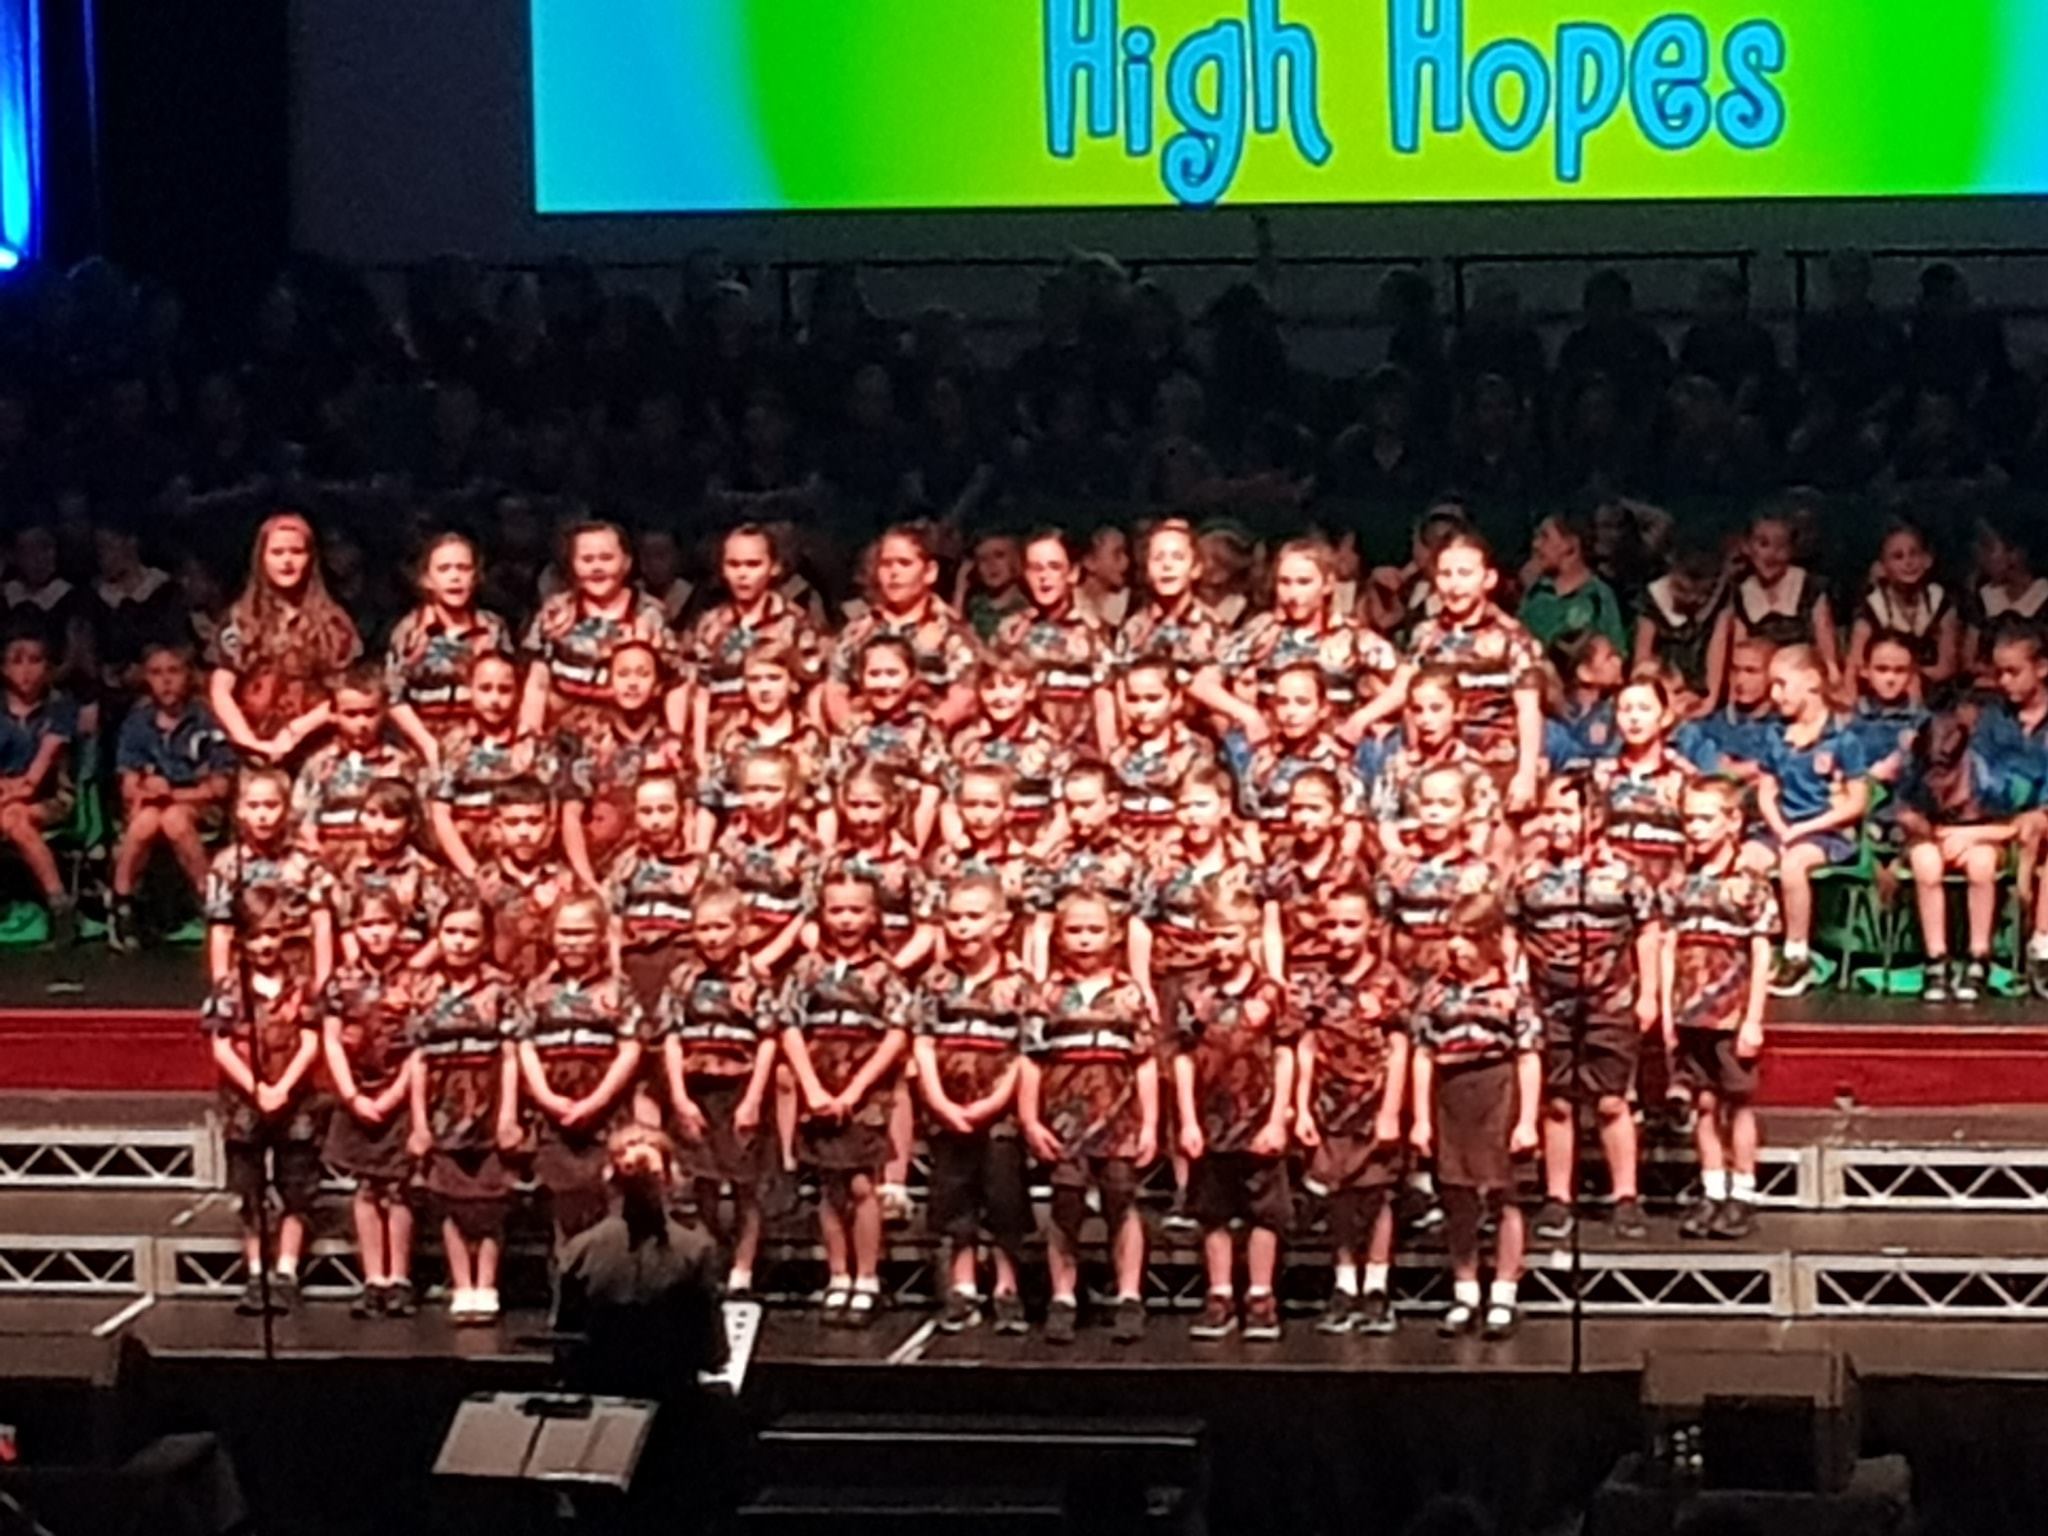 school choral group performing on stage at festival